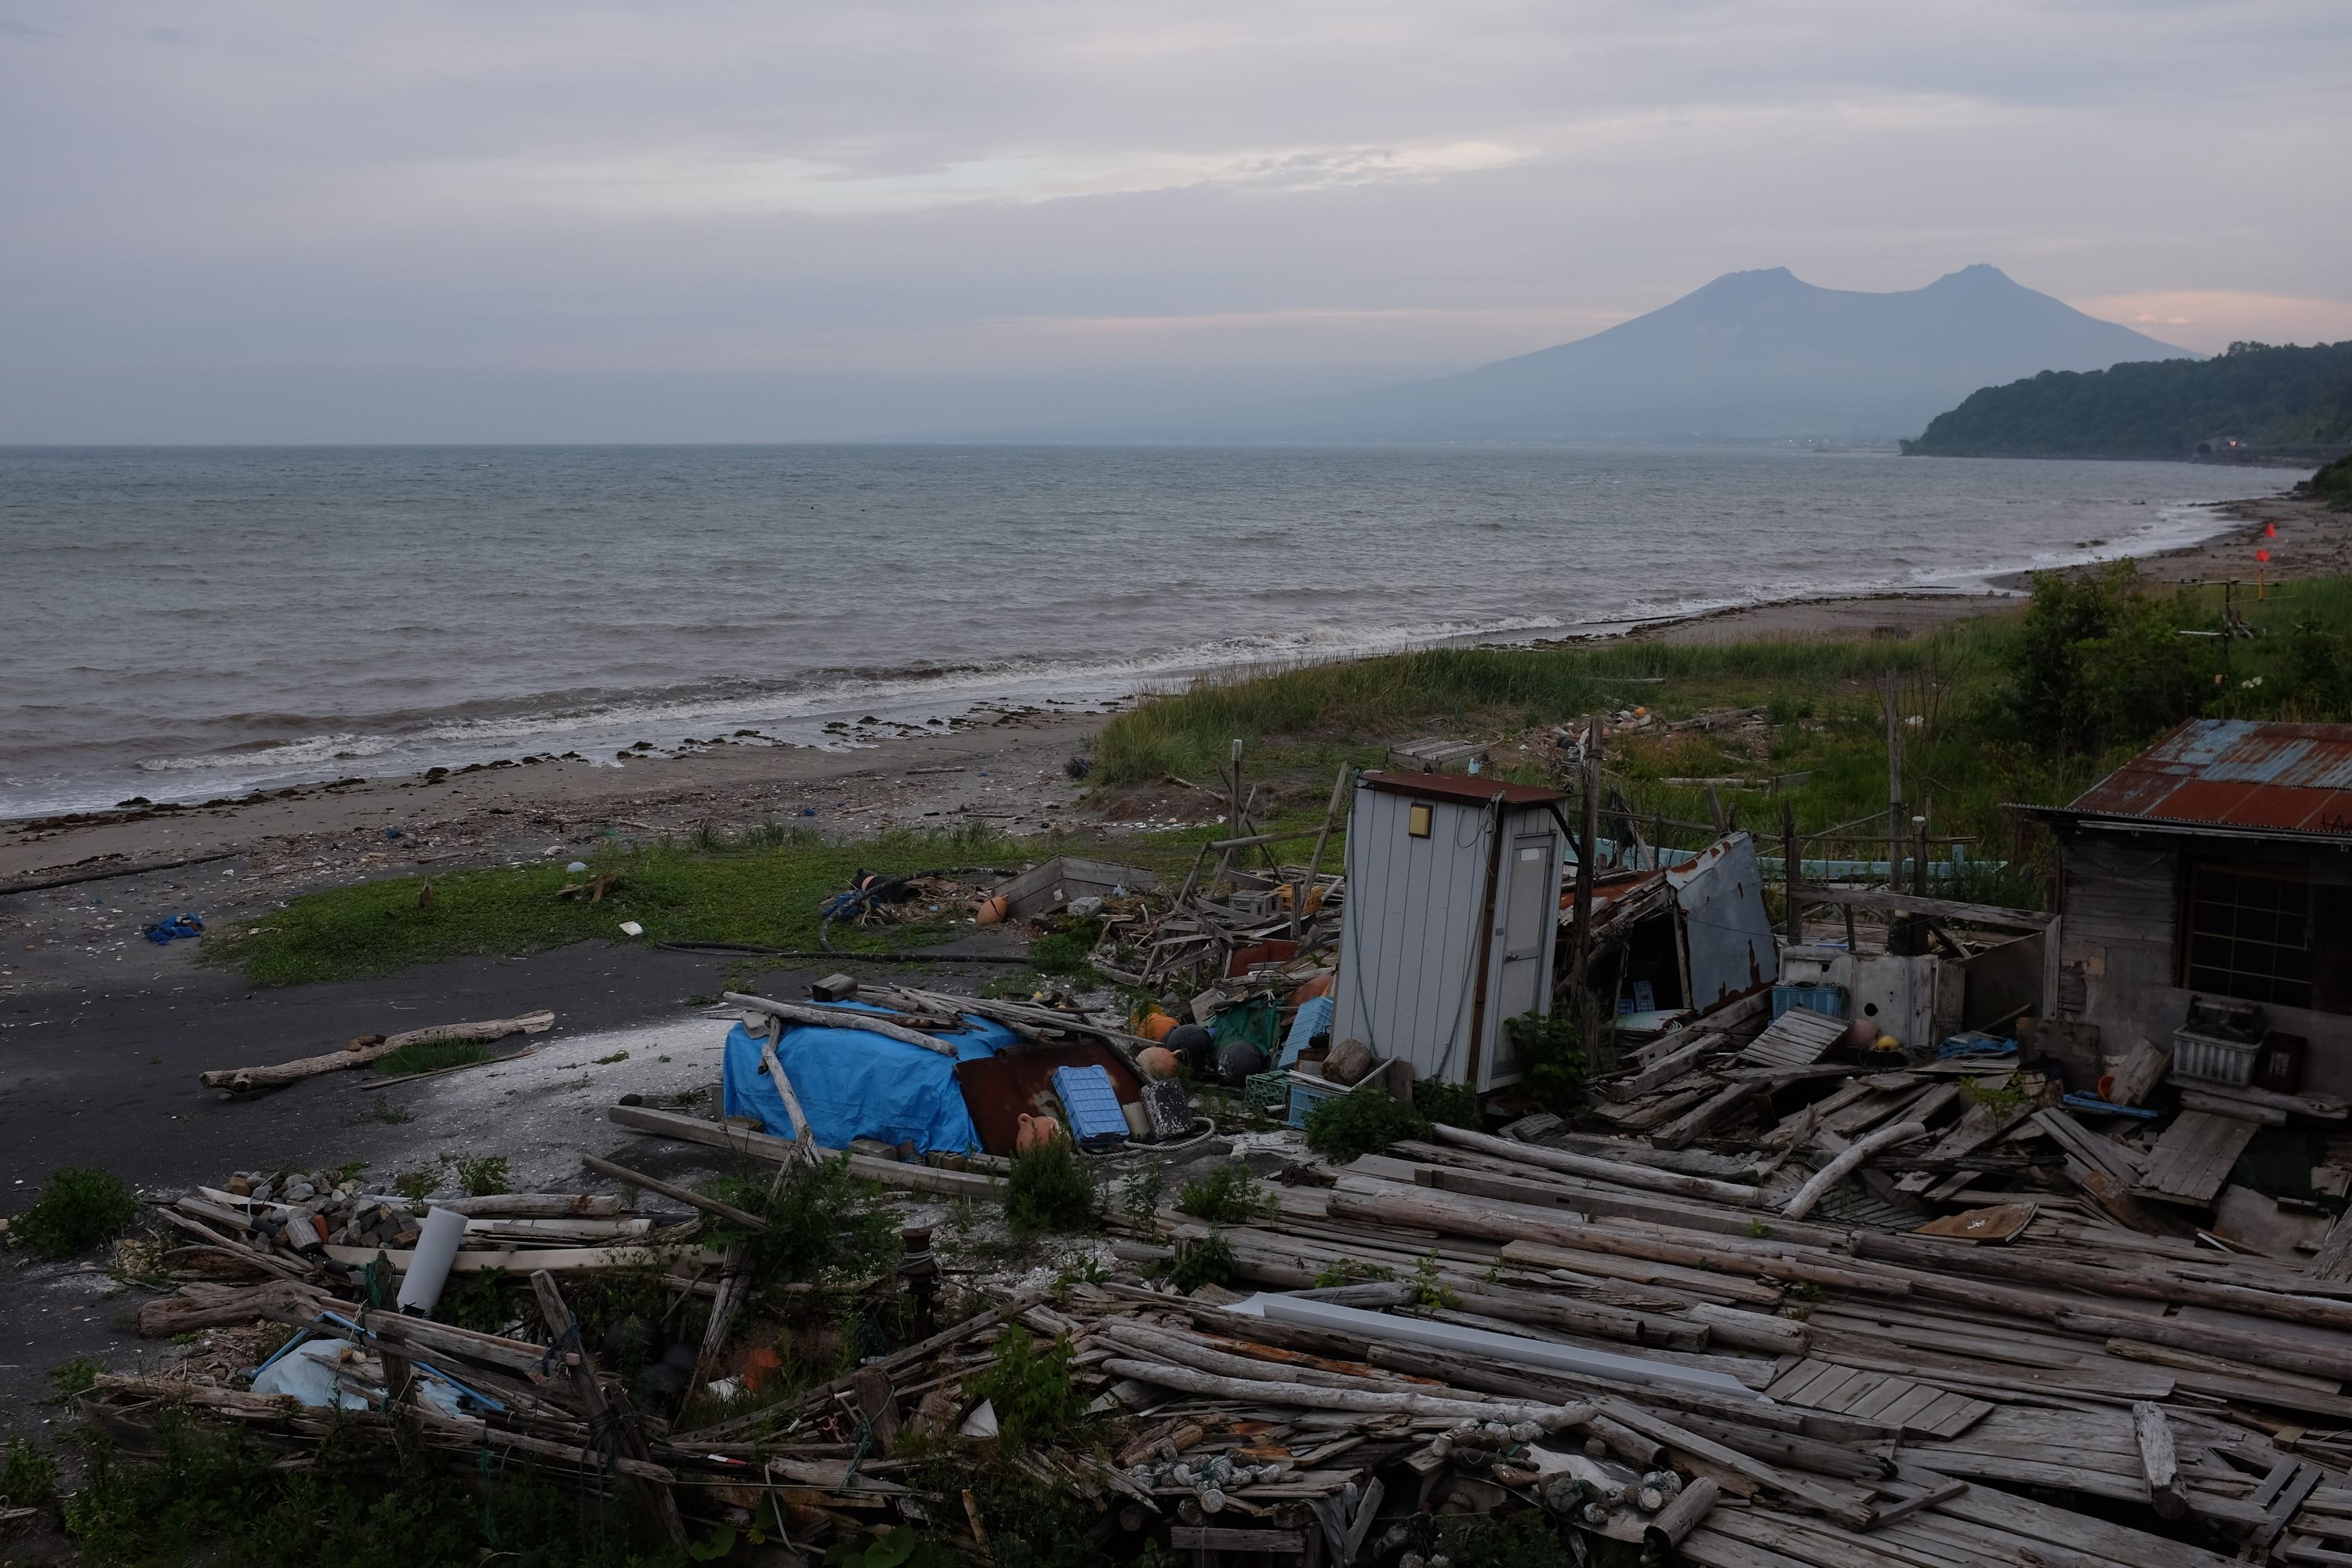 A distant view of Mount Komagatake from a debris-covered beach.